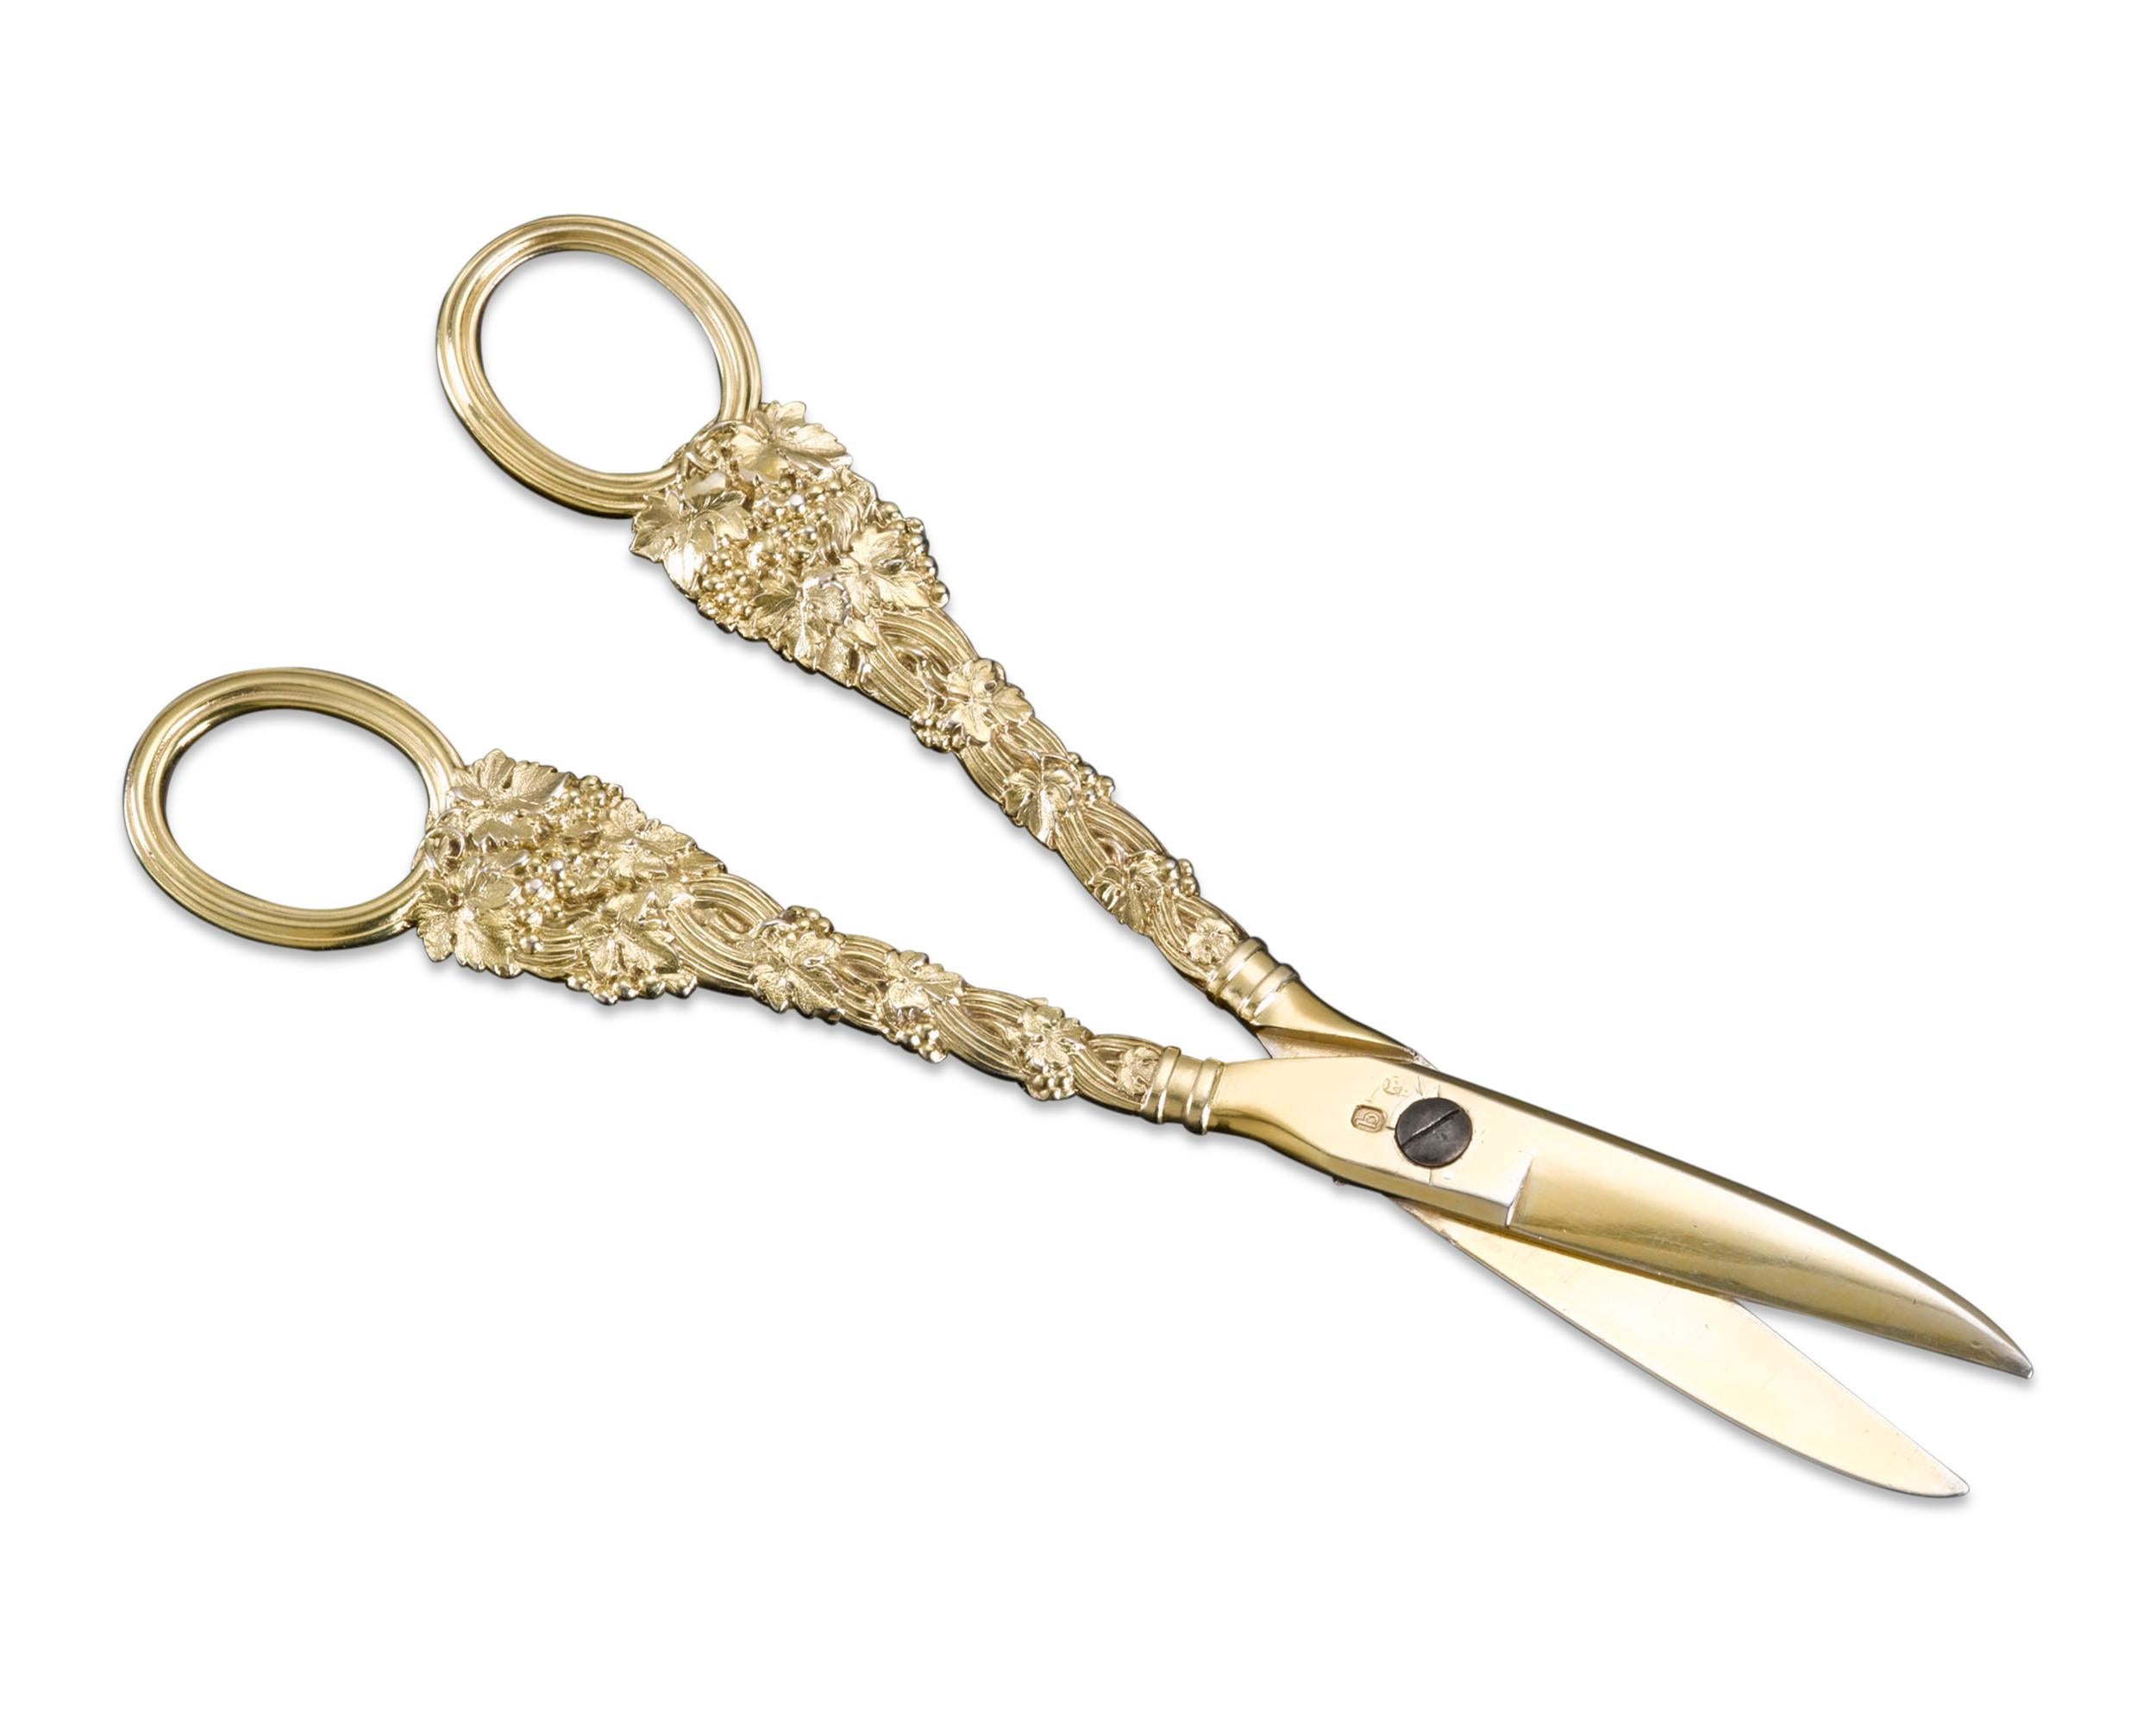 An incredibly rare and exceptional pair of grape shears by Paul Storr, one of the most esteemed silversmiths in history. With handles laden with grapevines, this pair of intricate silver-gilt shears is an uncommon item in Storr's extraordinary